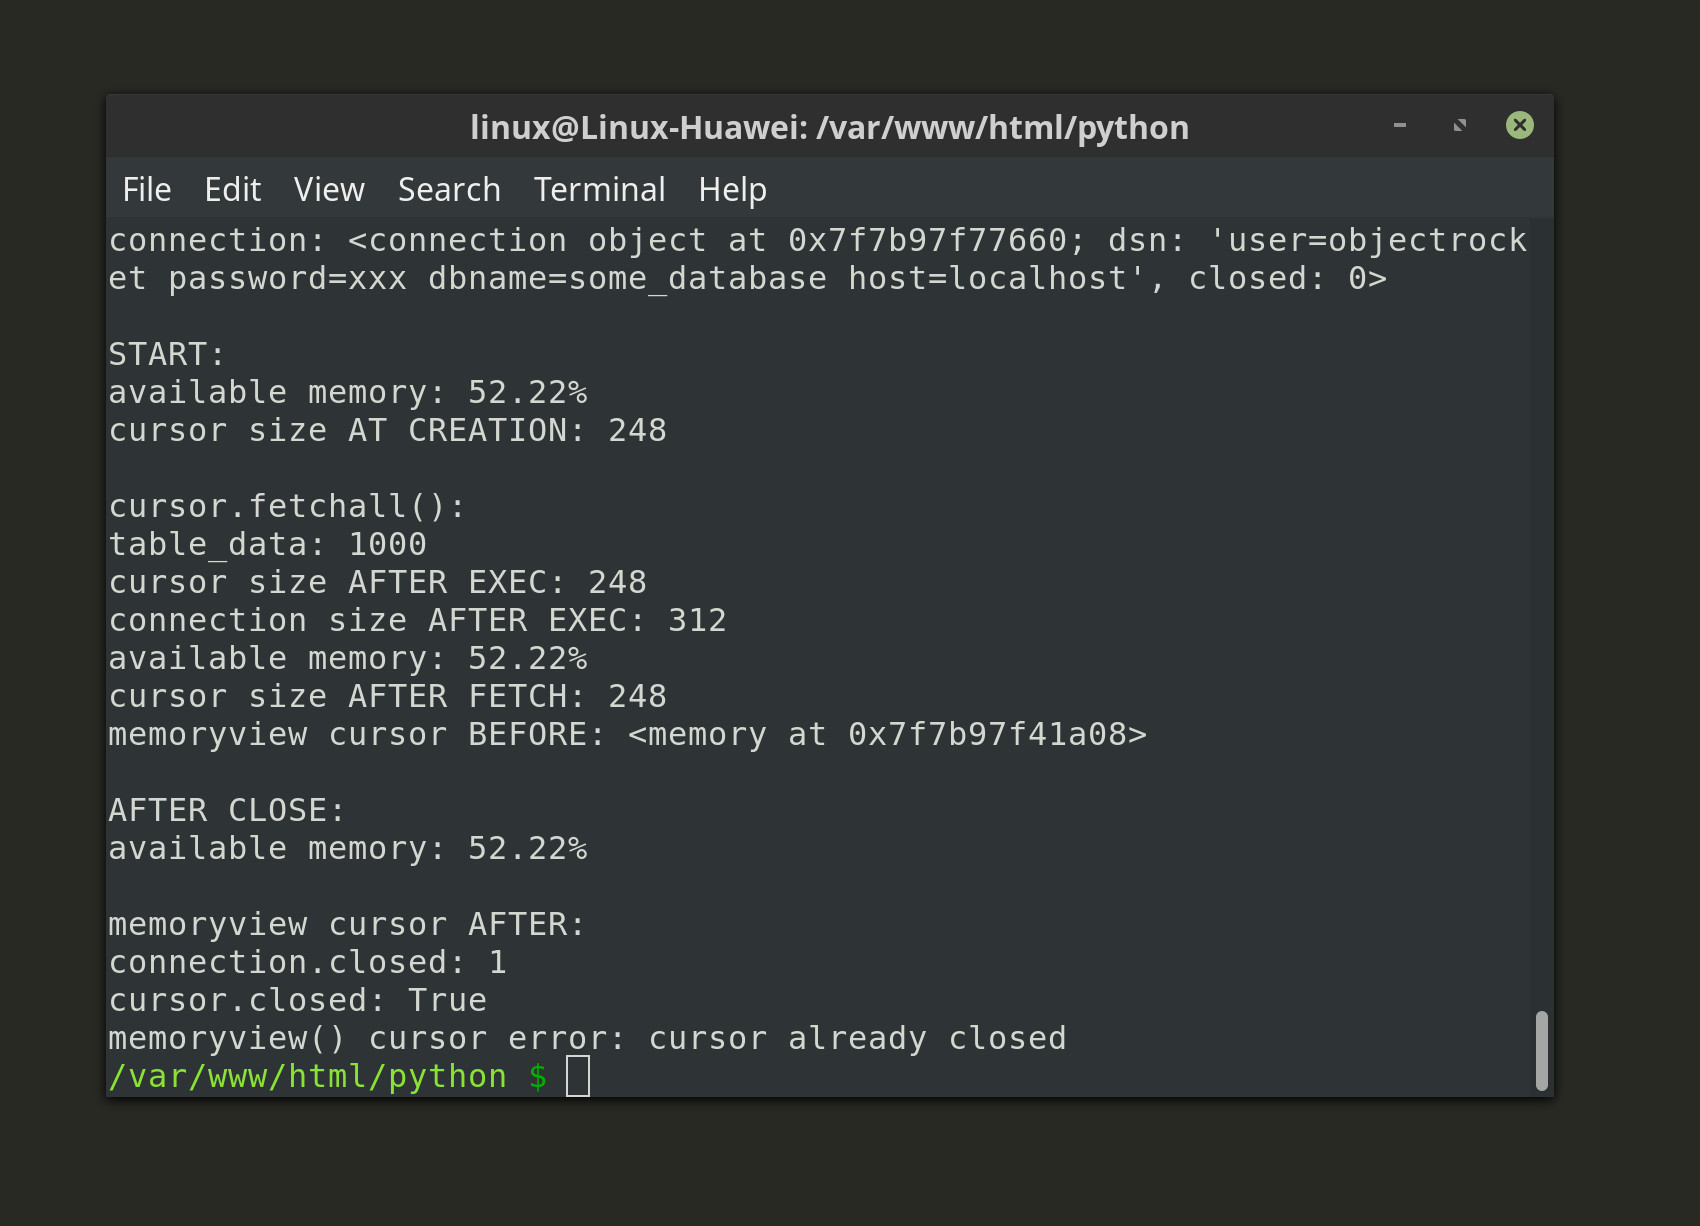 Screenshot of a Python script running in a terminal window returning memory information while running a psycopg2 app